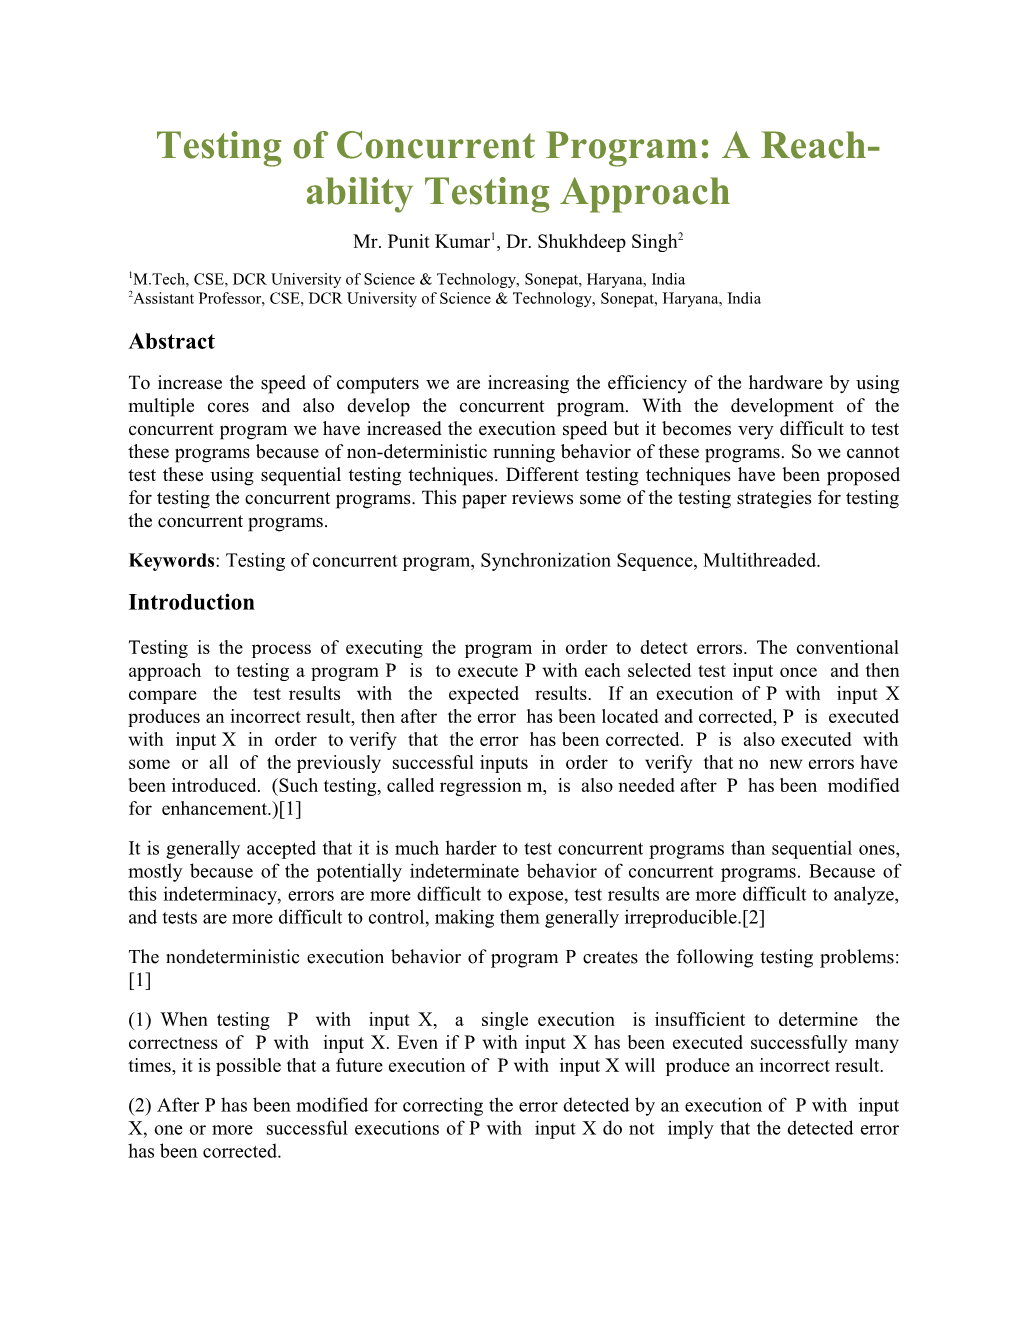 Testing of Concurrent Program: a Reach-Ability Testing Approach